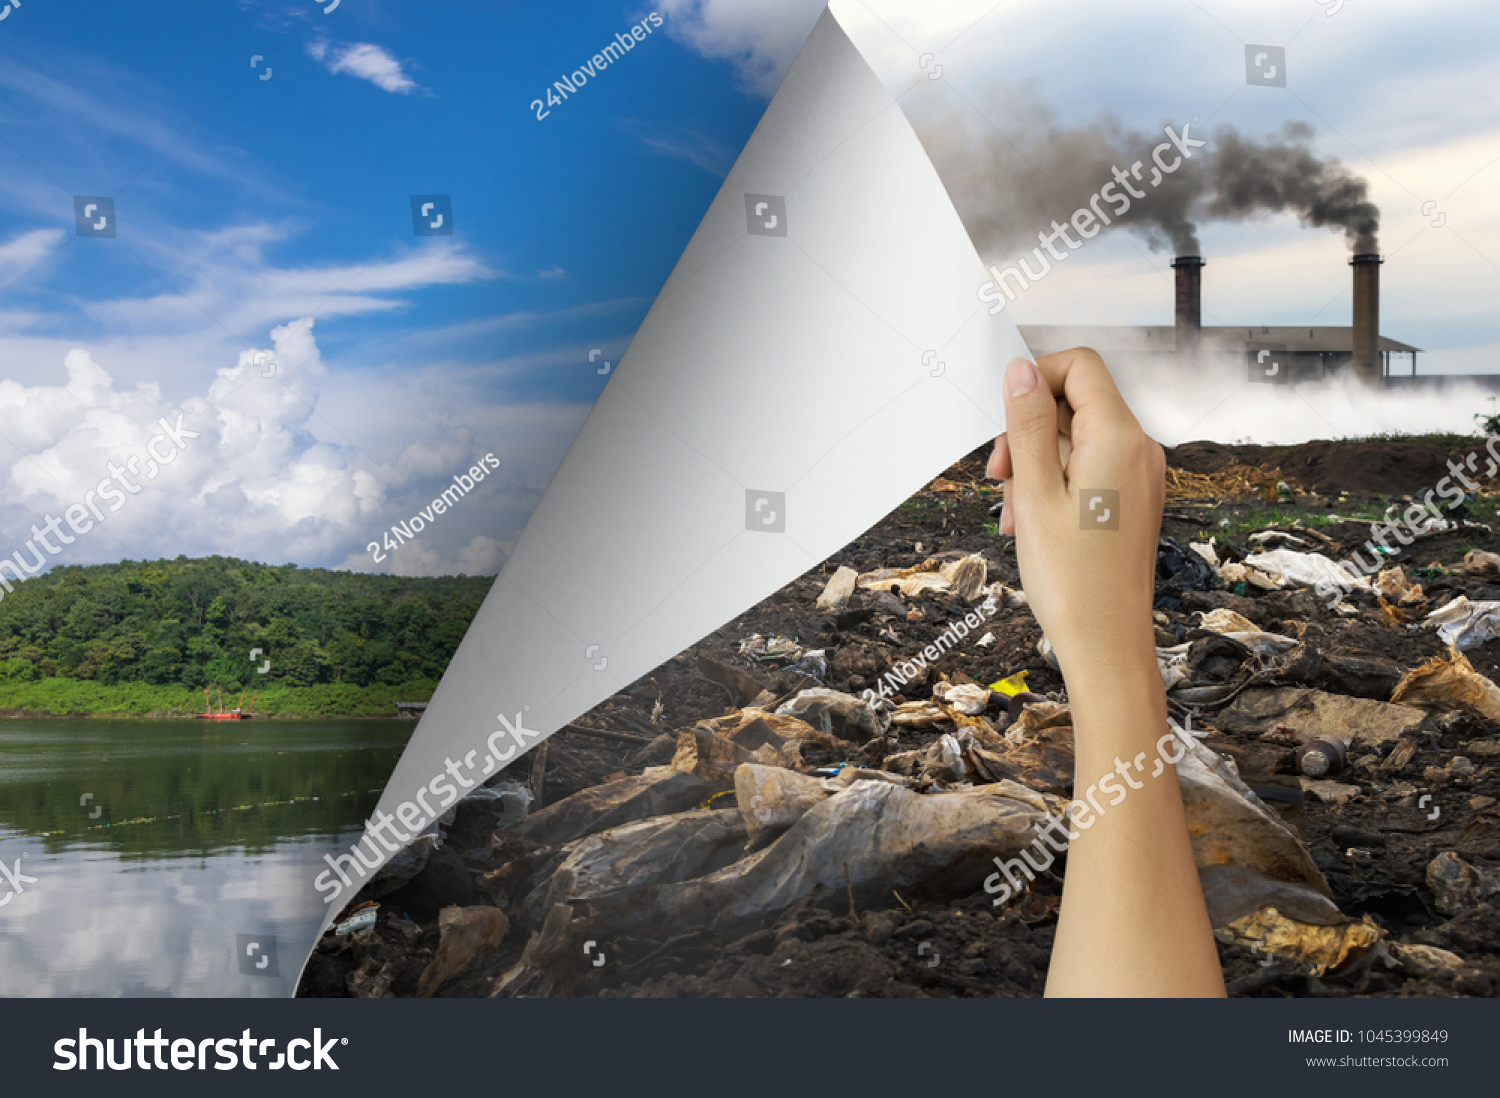 Change concept, Woman hand turning pollution page revealing nature landscape, changing reality, hope inspiration to environmental protection and environmental campaign. #1045399849